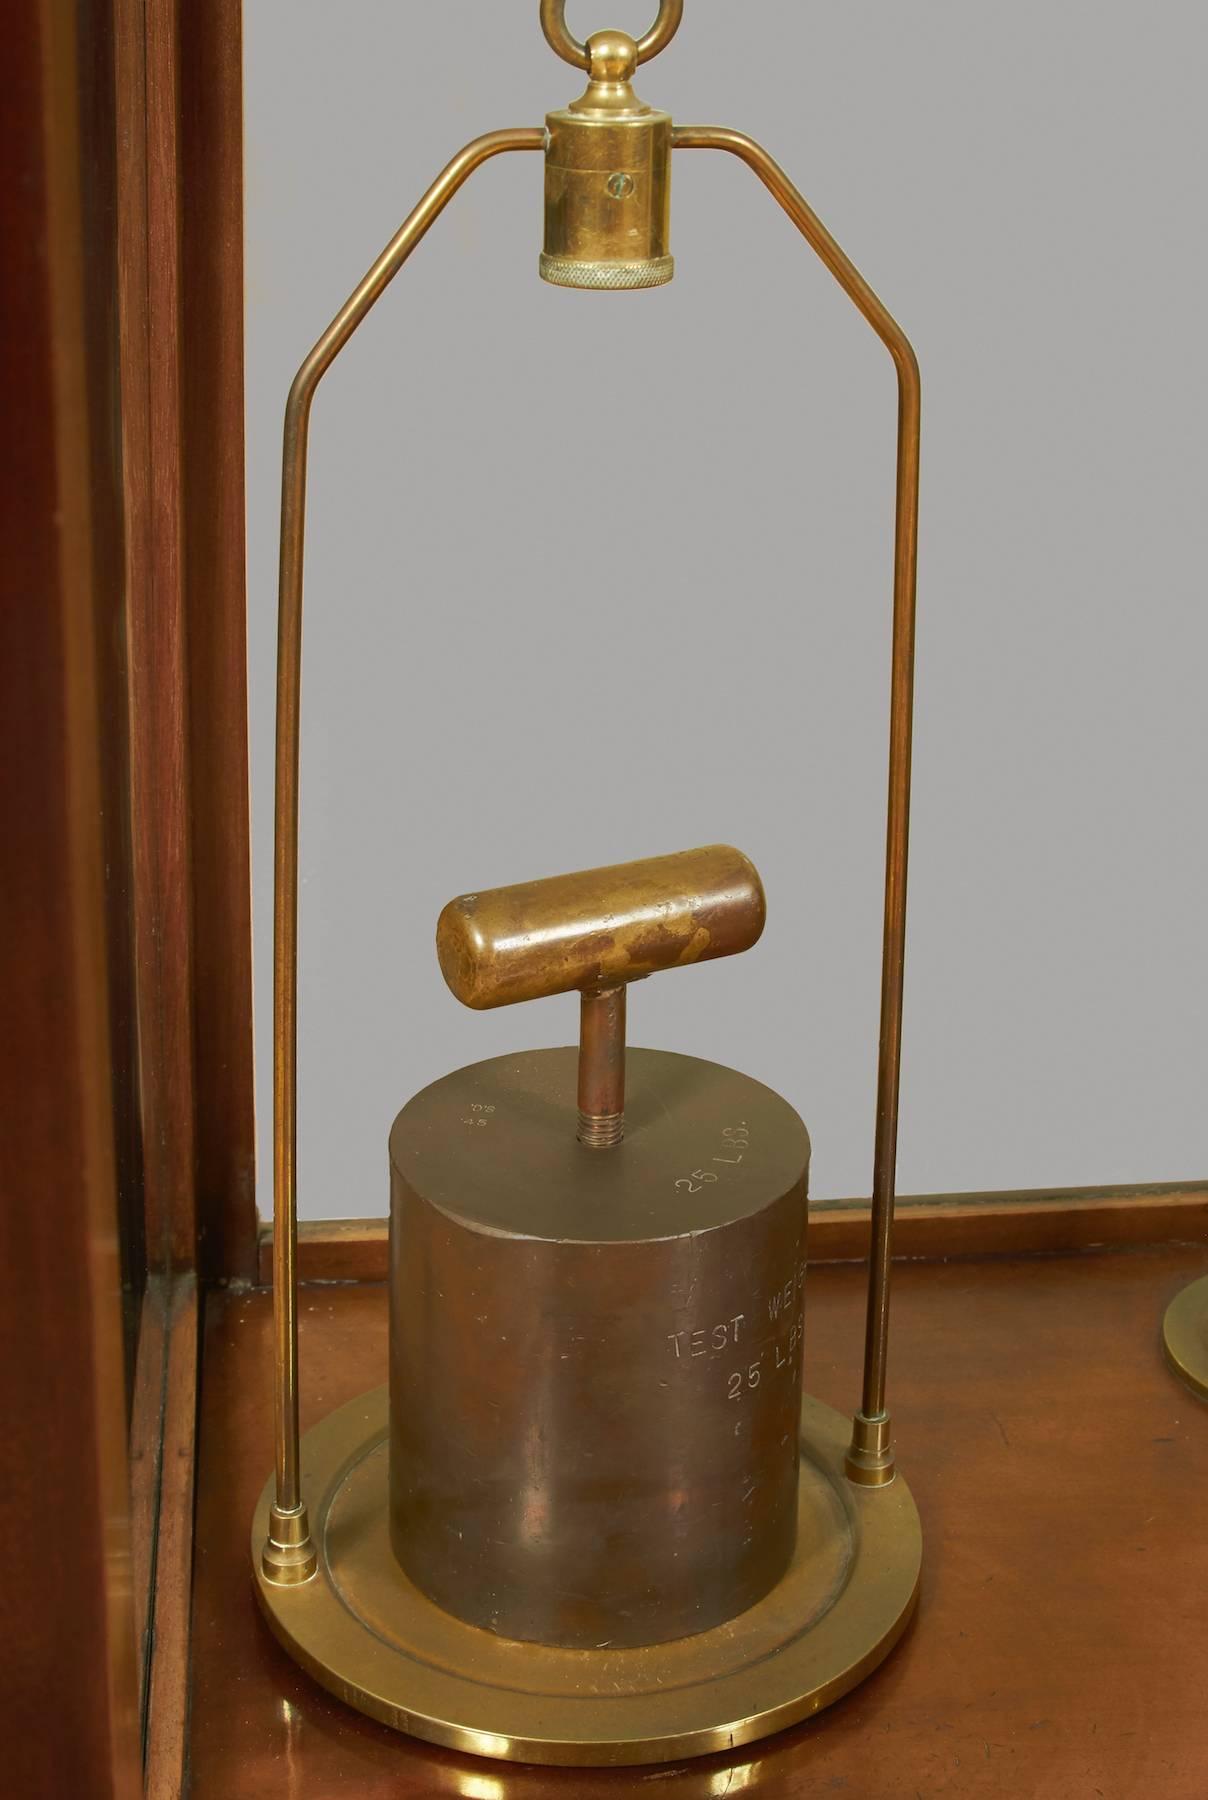 Three Foot Tall Cased Brass and Mahogany Balance by J.H. Heal Co. 1